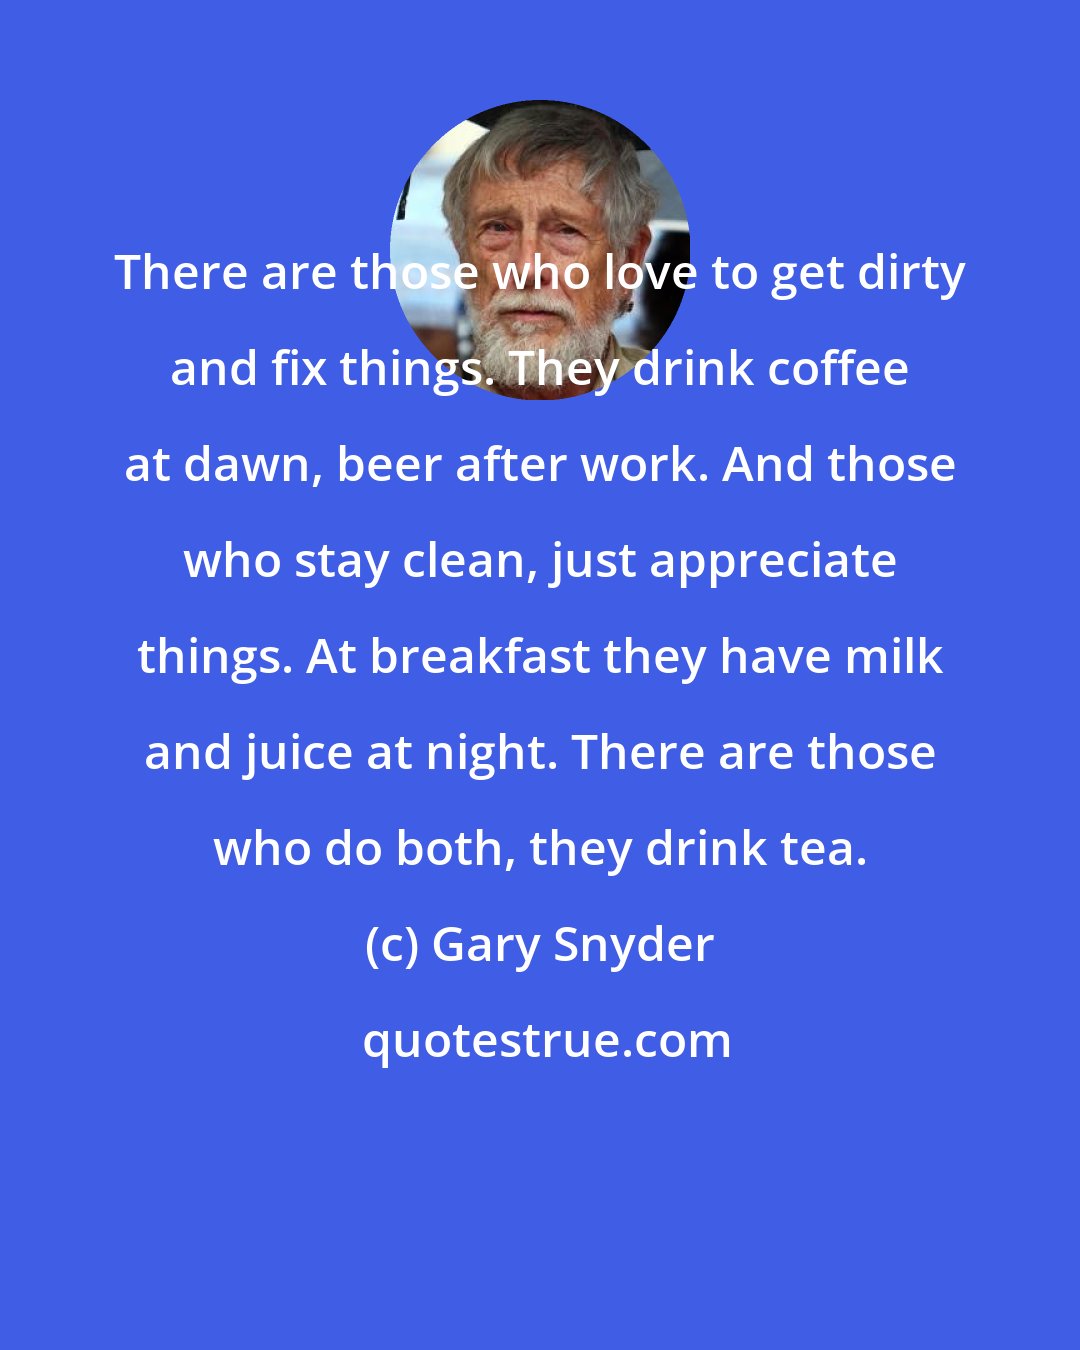 Gary Snyder: There are those who love to get dirty and fix things. They drink coffee at dawn, beer after work. And those who stay clean, just appreciate things. At breakfast they have milk and juice at night. There are those who do both, they drink tea.